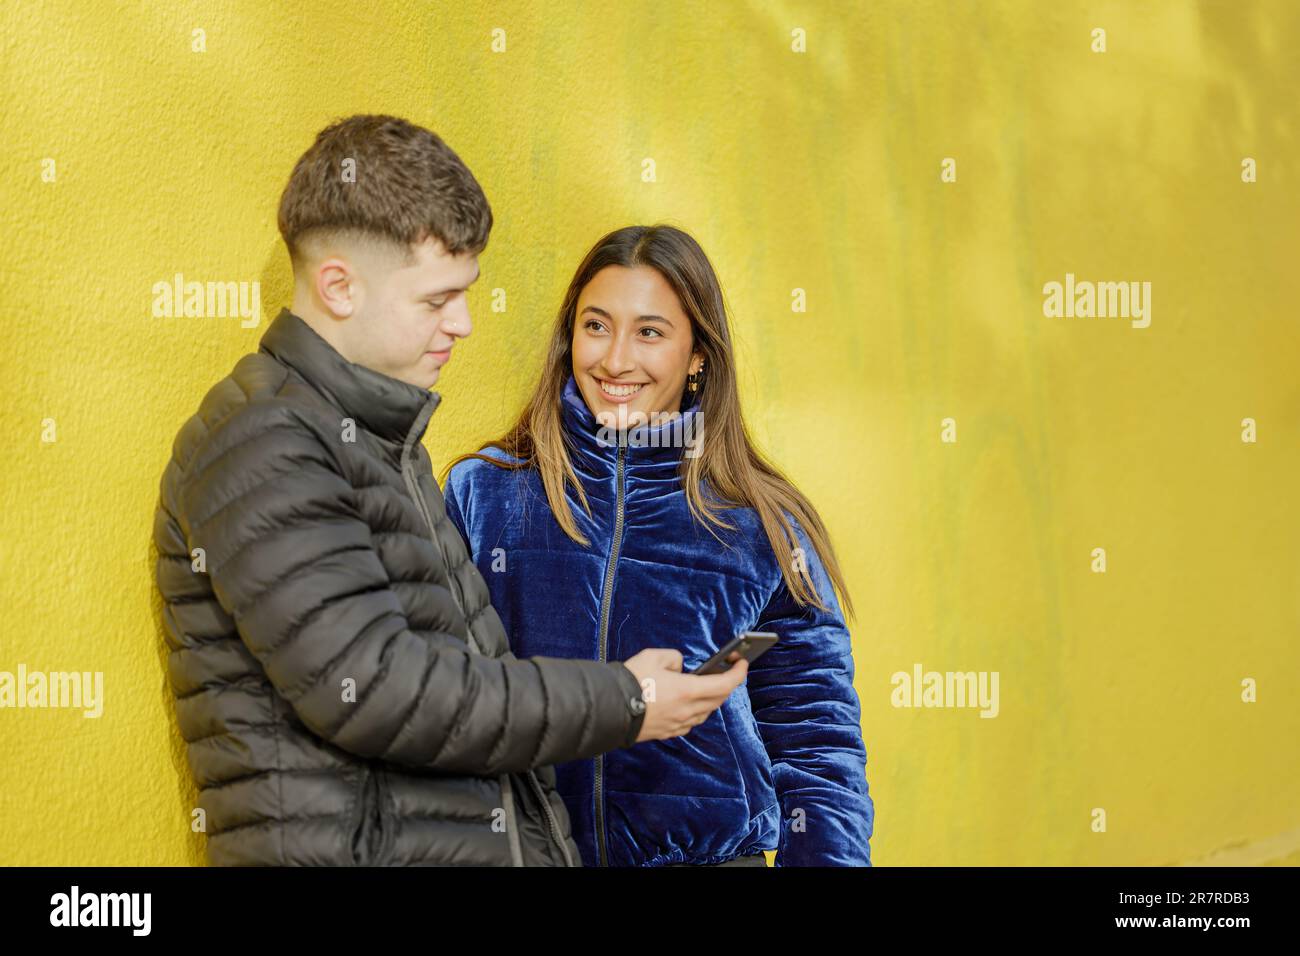 Couple of boy and girl leaning on a yellow wall watching the mobile phone with copy space. Stock Photo